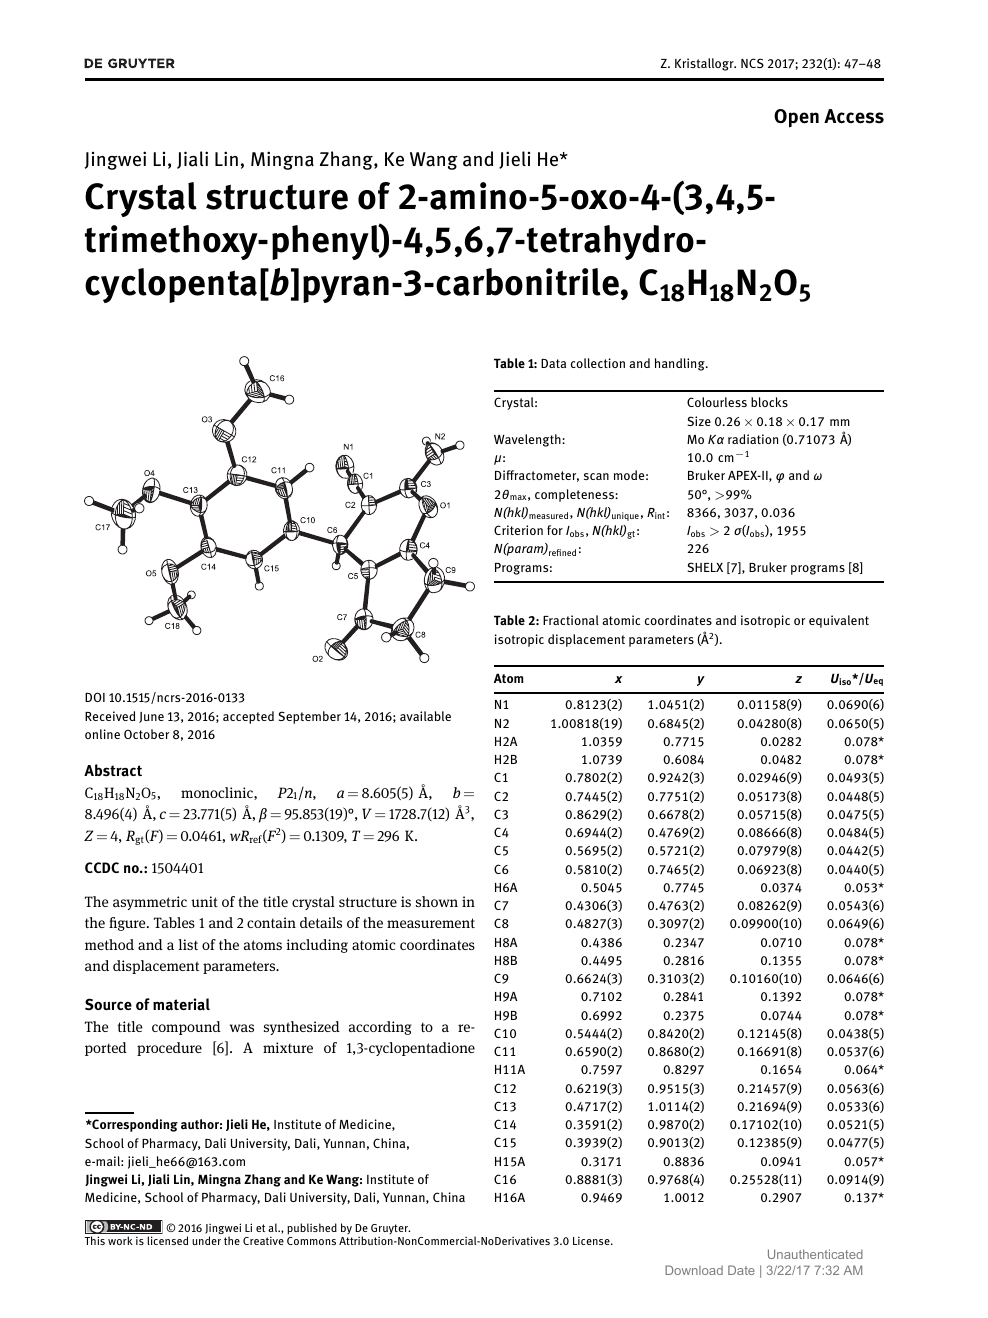 Crystal Structure Of 2 Amino 5 Oxo 4 3 4 5 Trimethoxy Phenyl 4 5 6 7 Tetrahydro Cyclopenta B Pyran 3 Carbonitrile C18h18n2o5 Topic Of Research Paper In Chemical Sciences Download Scholarly Article Pdf And Read For Free On Cyberleninka Open